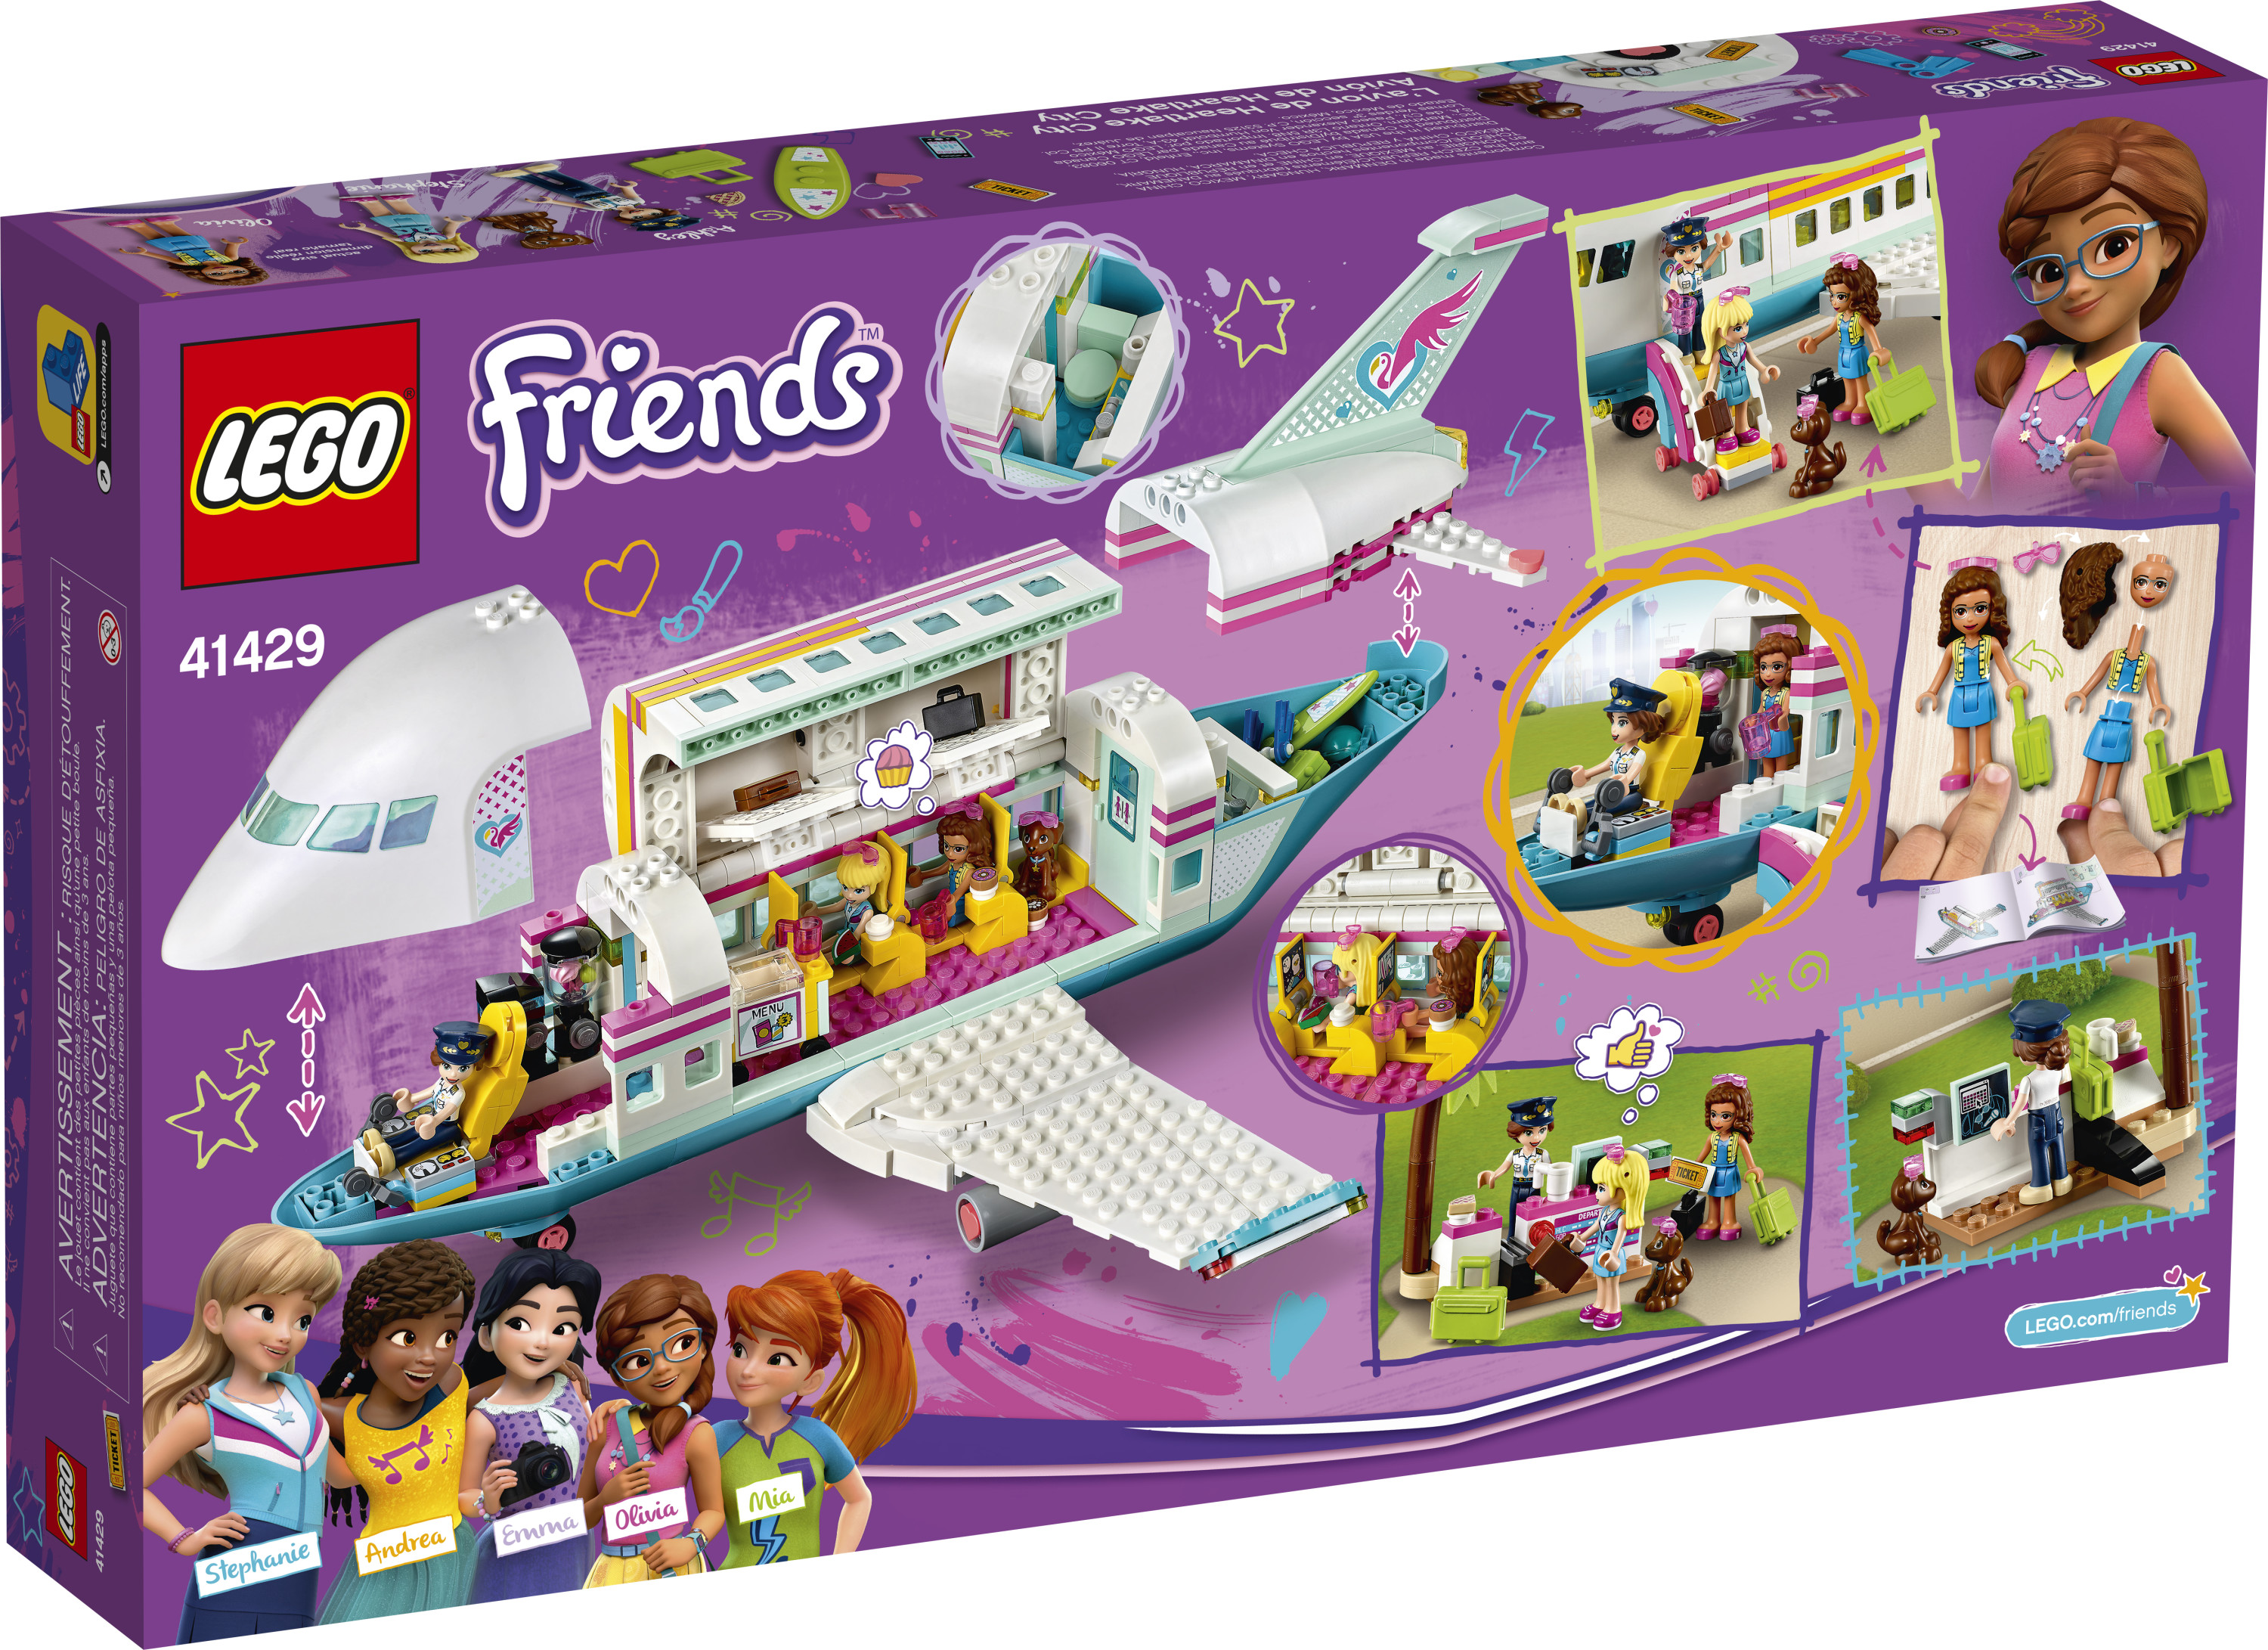 LEGO Friends Heartlake City Airplane 41429 Building Toy Inspires